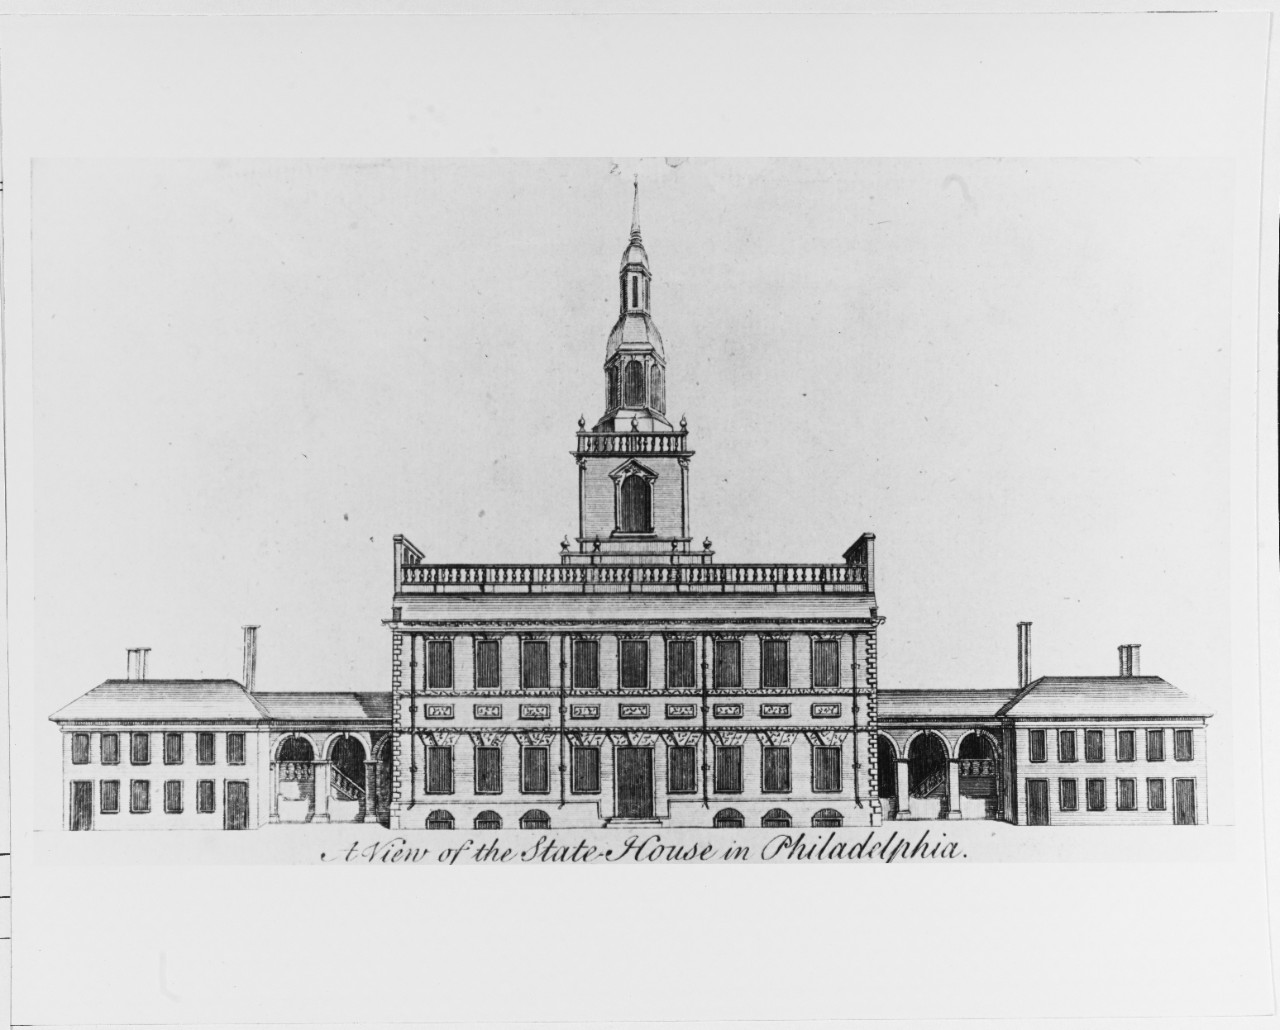 A view of the State House in Philadelphia